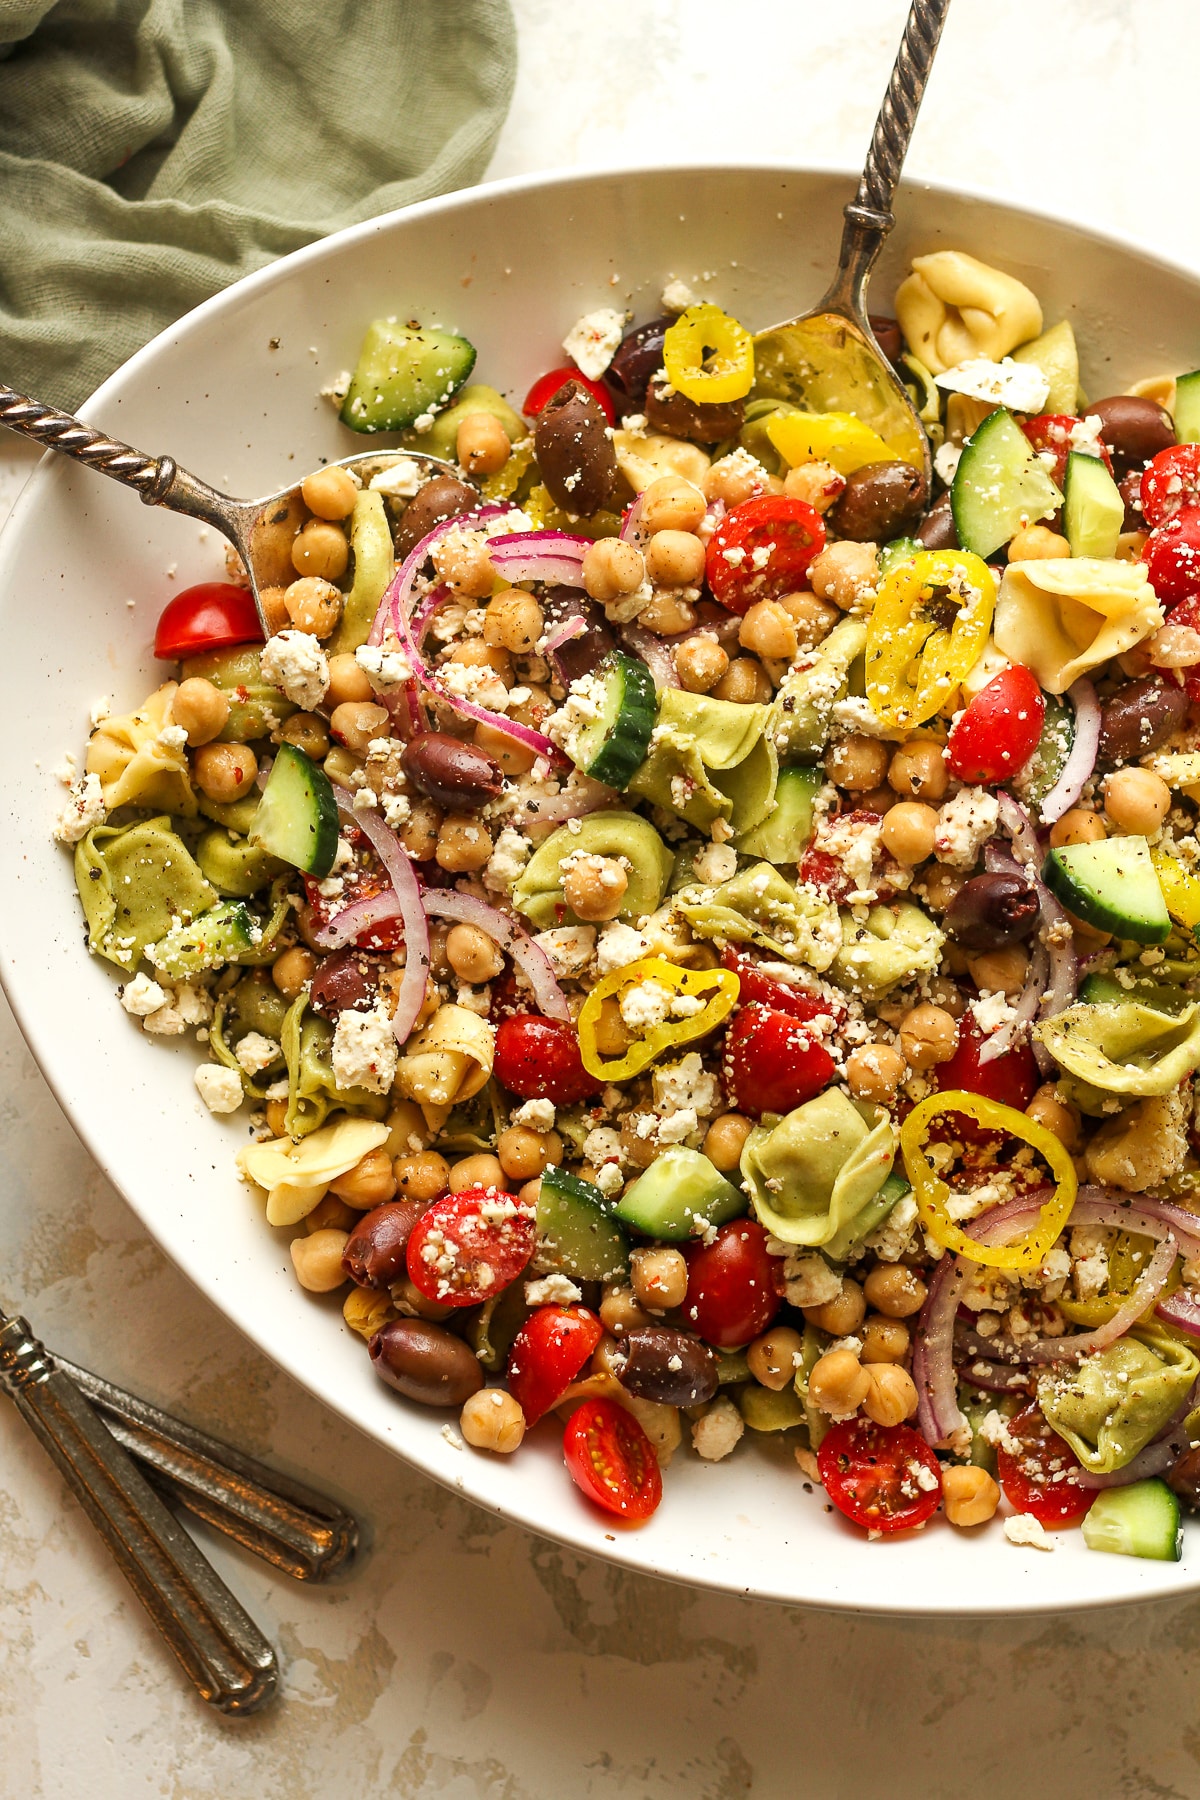 A bowl of pasta salad with tortellini.